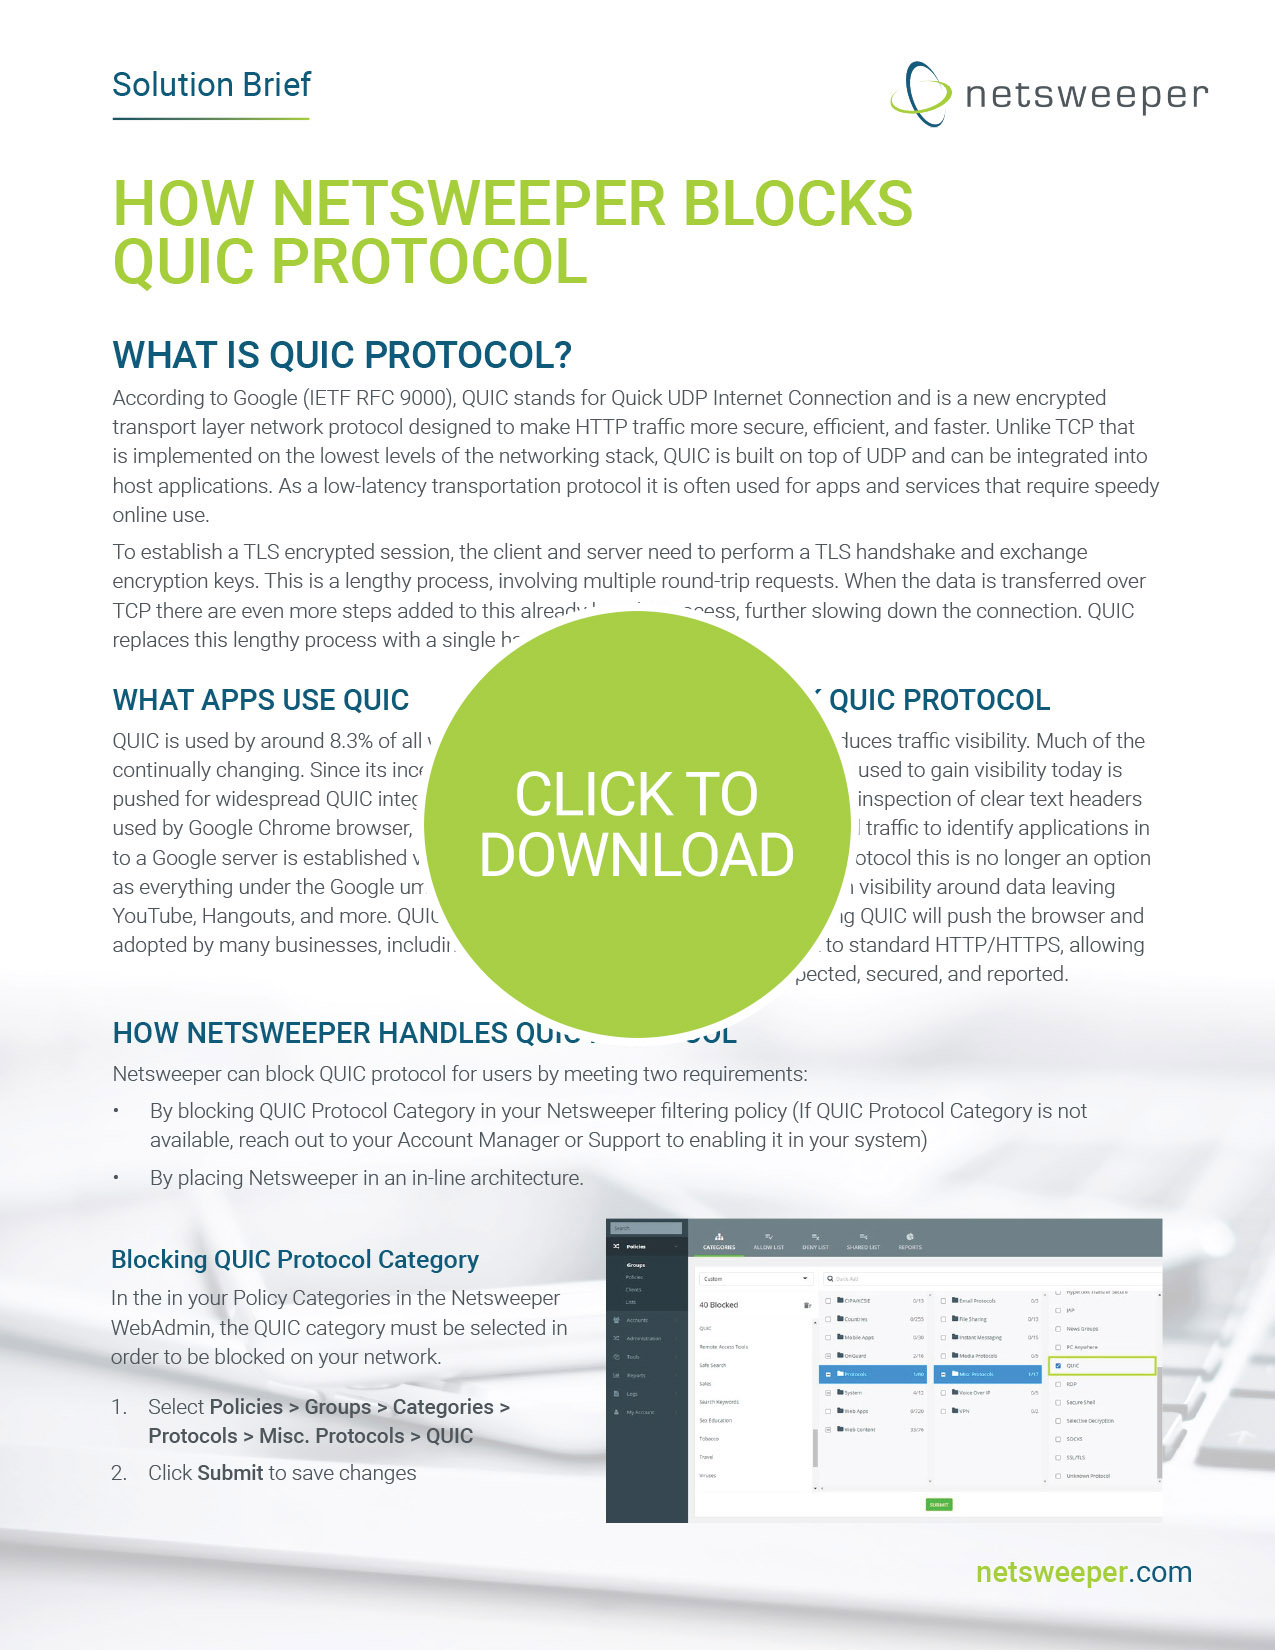 Solution Brief: How Netsweeper Blocks QUIC Protocol